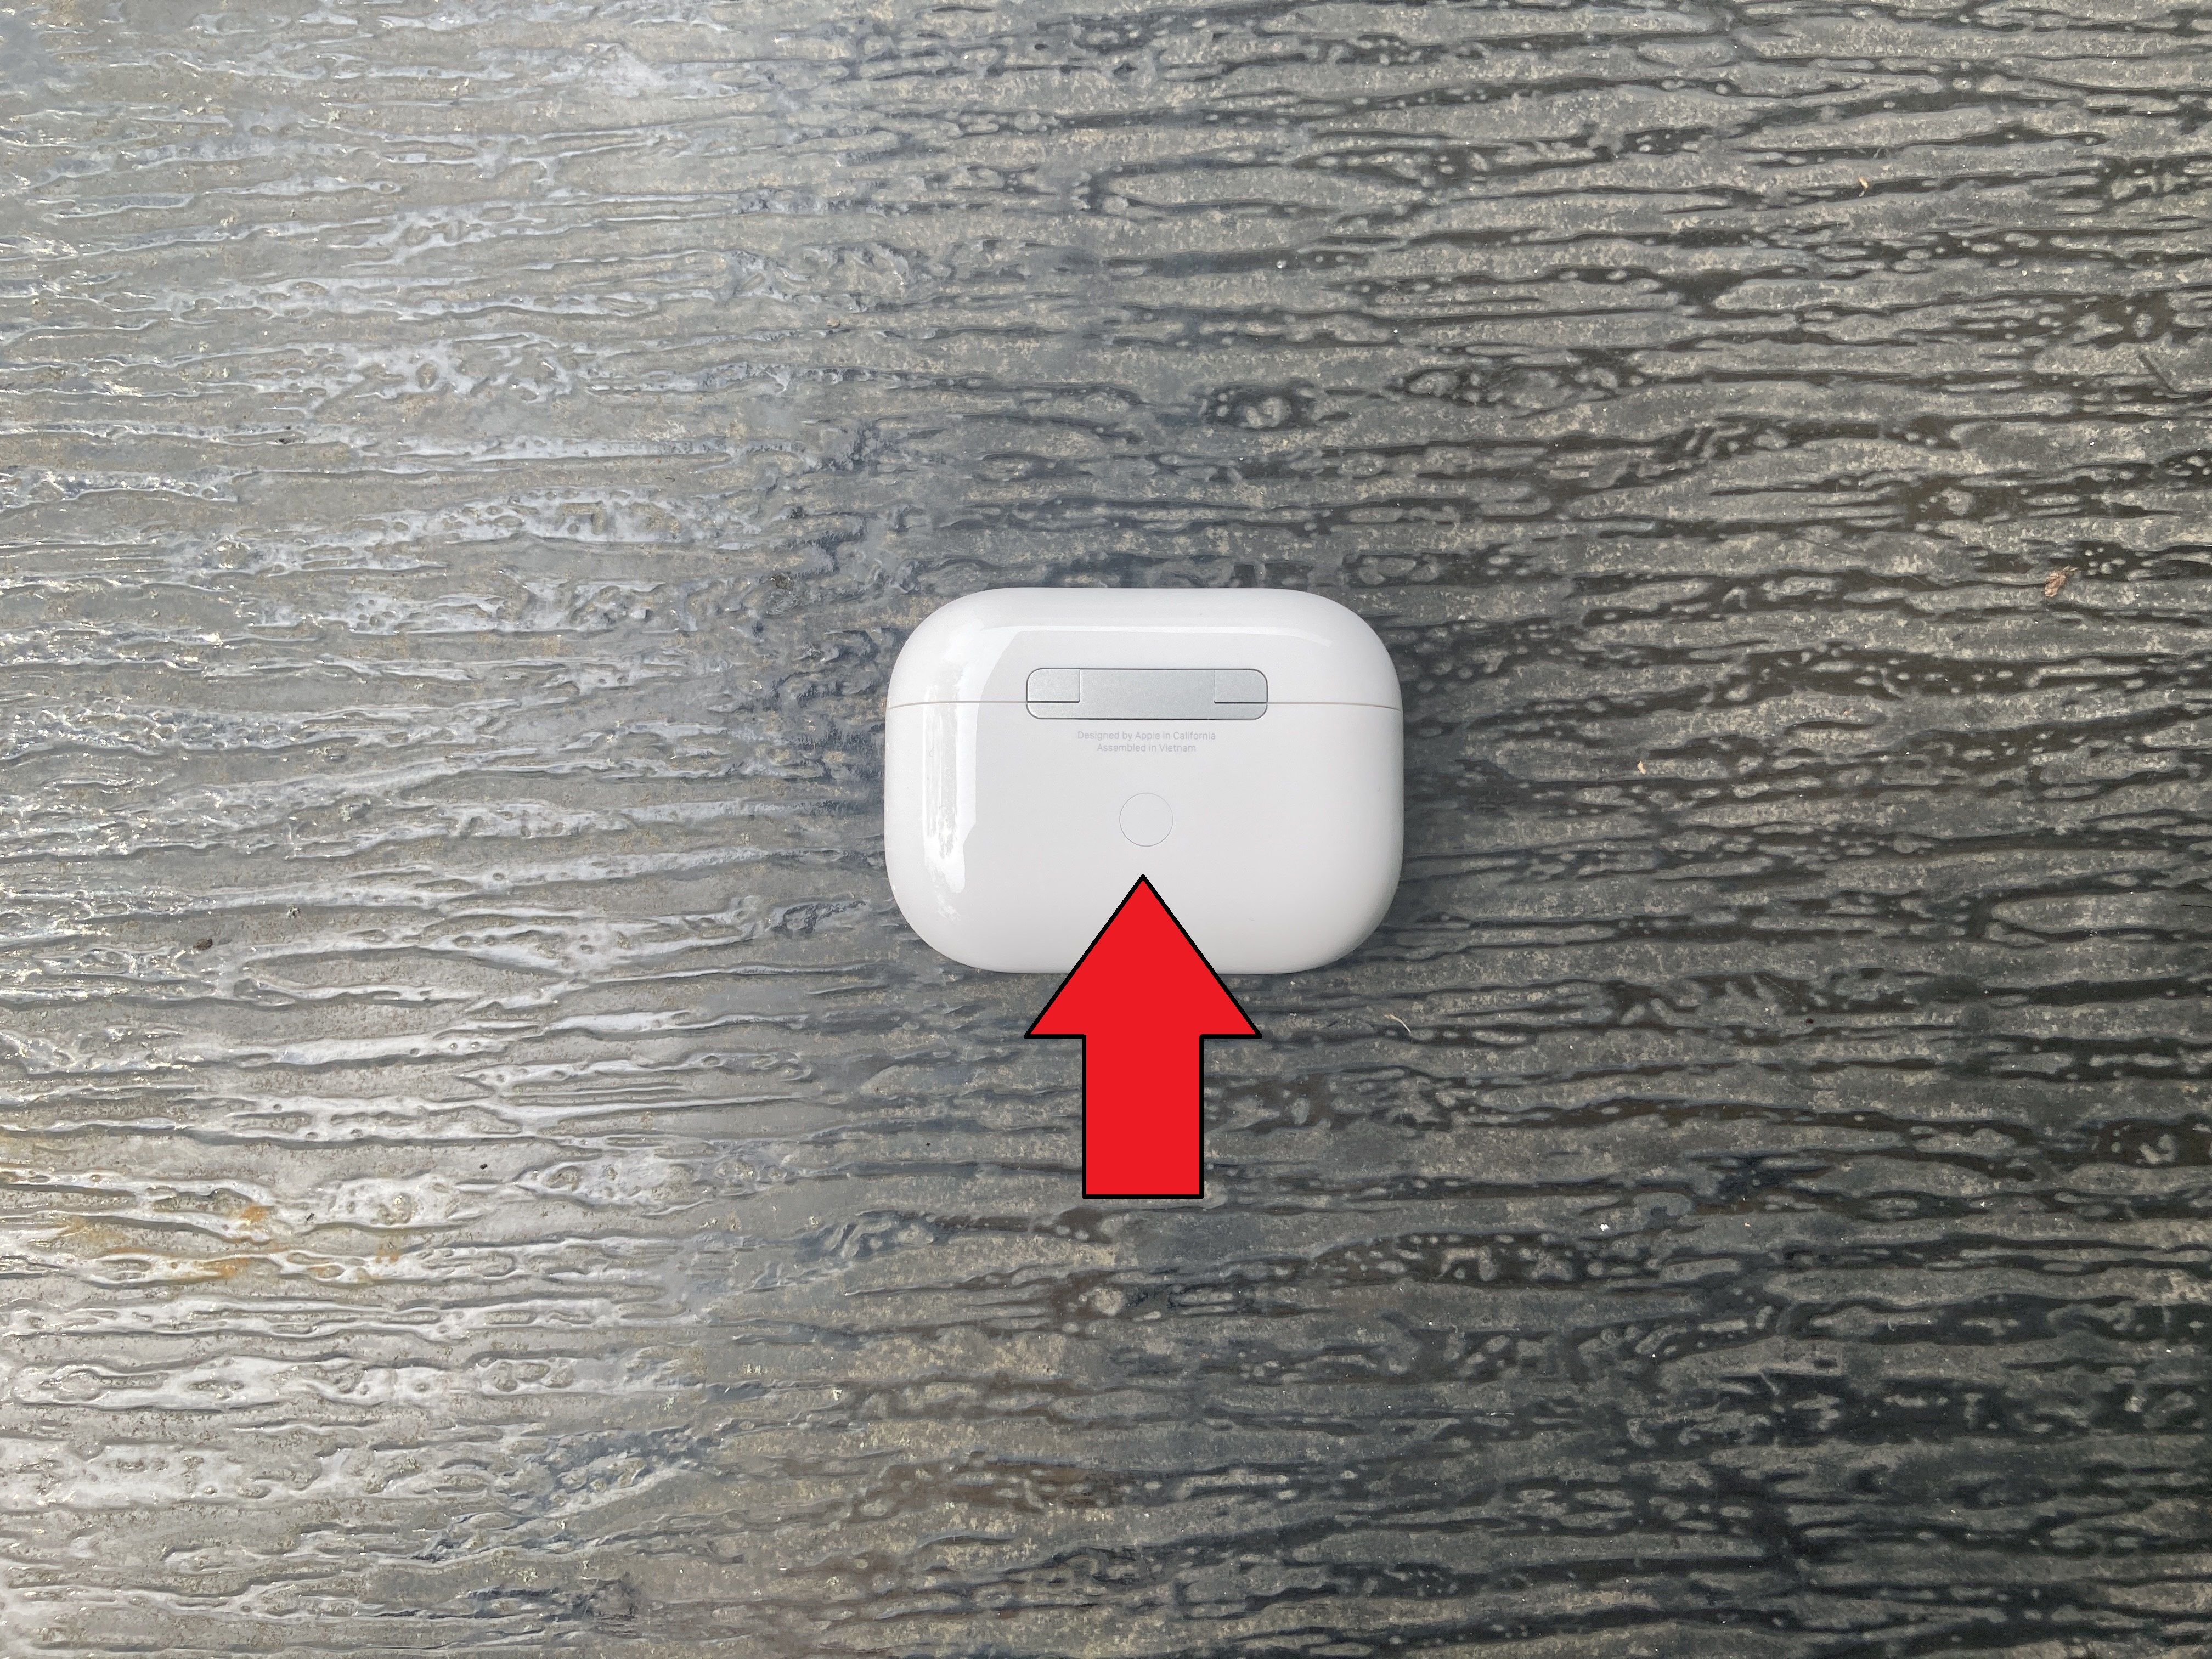 How to connect AirPods to iPhone